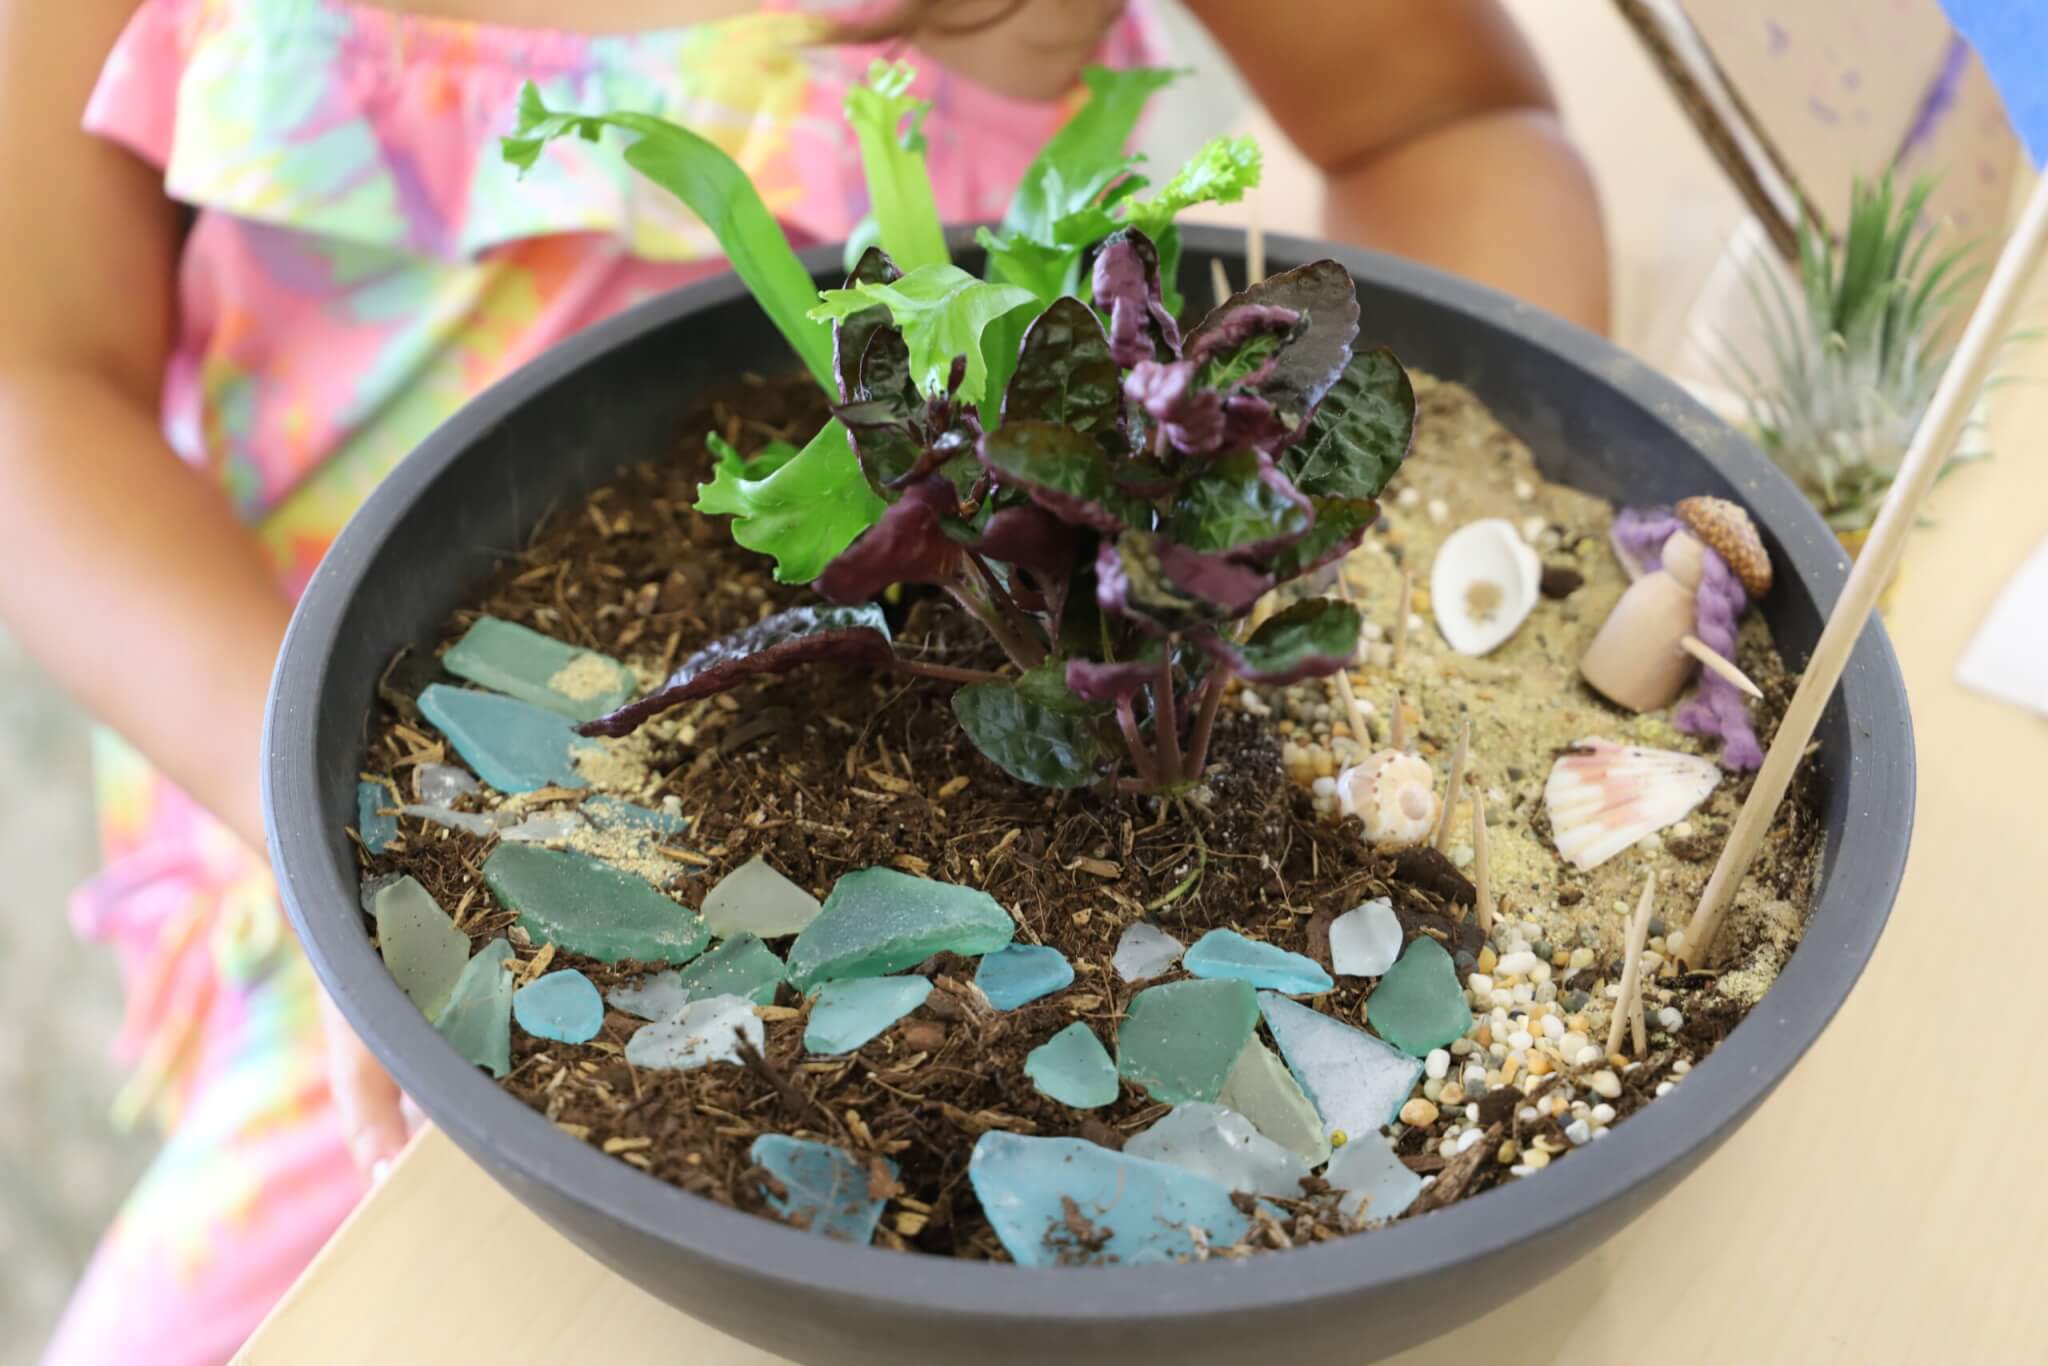 Fairy garden in a bowl with small plants and decorations.